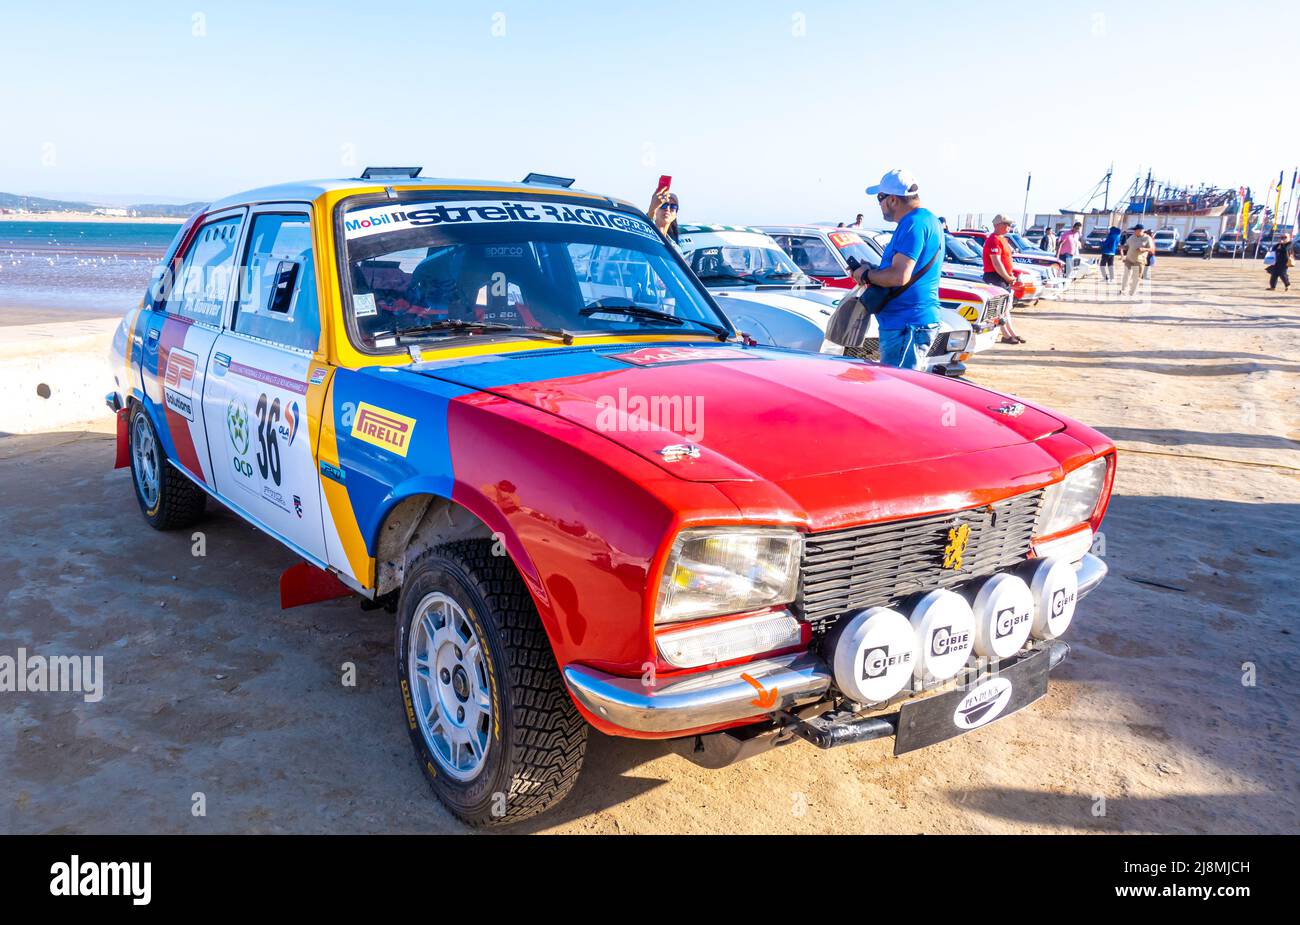 Peugeot Maroc Historic rally 2020 showcase event that took place May 16, 2022 in Essaouira, Morocco, North Africa Stock Photo